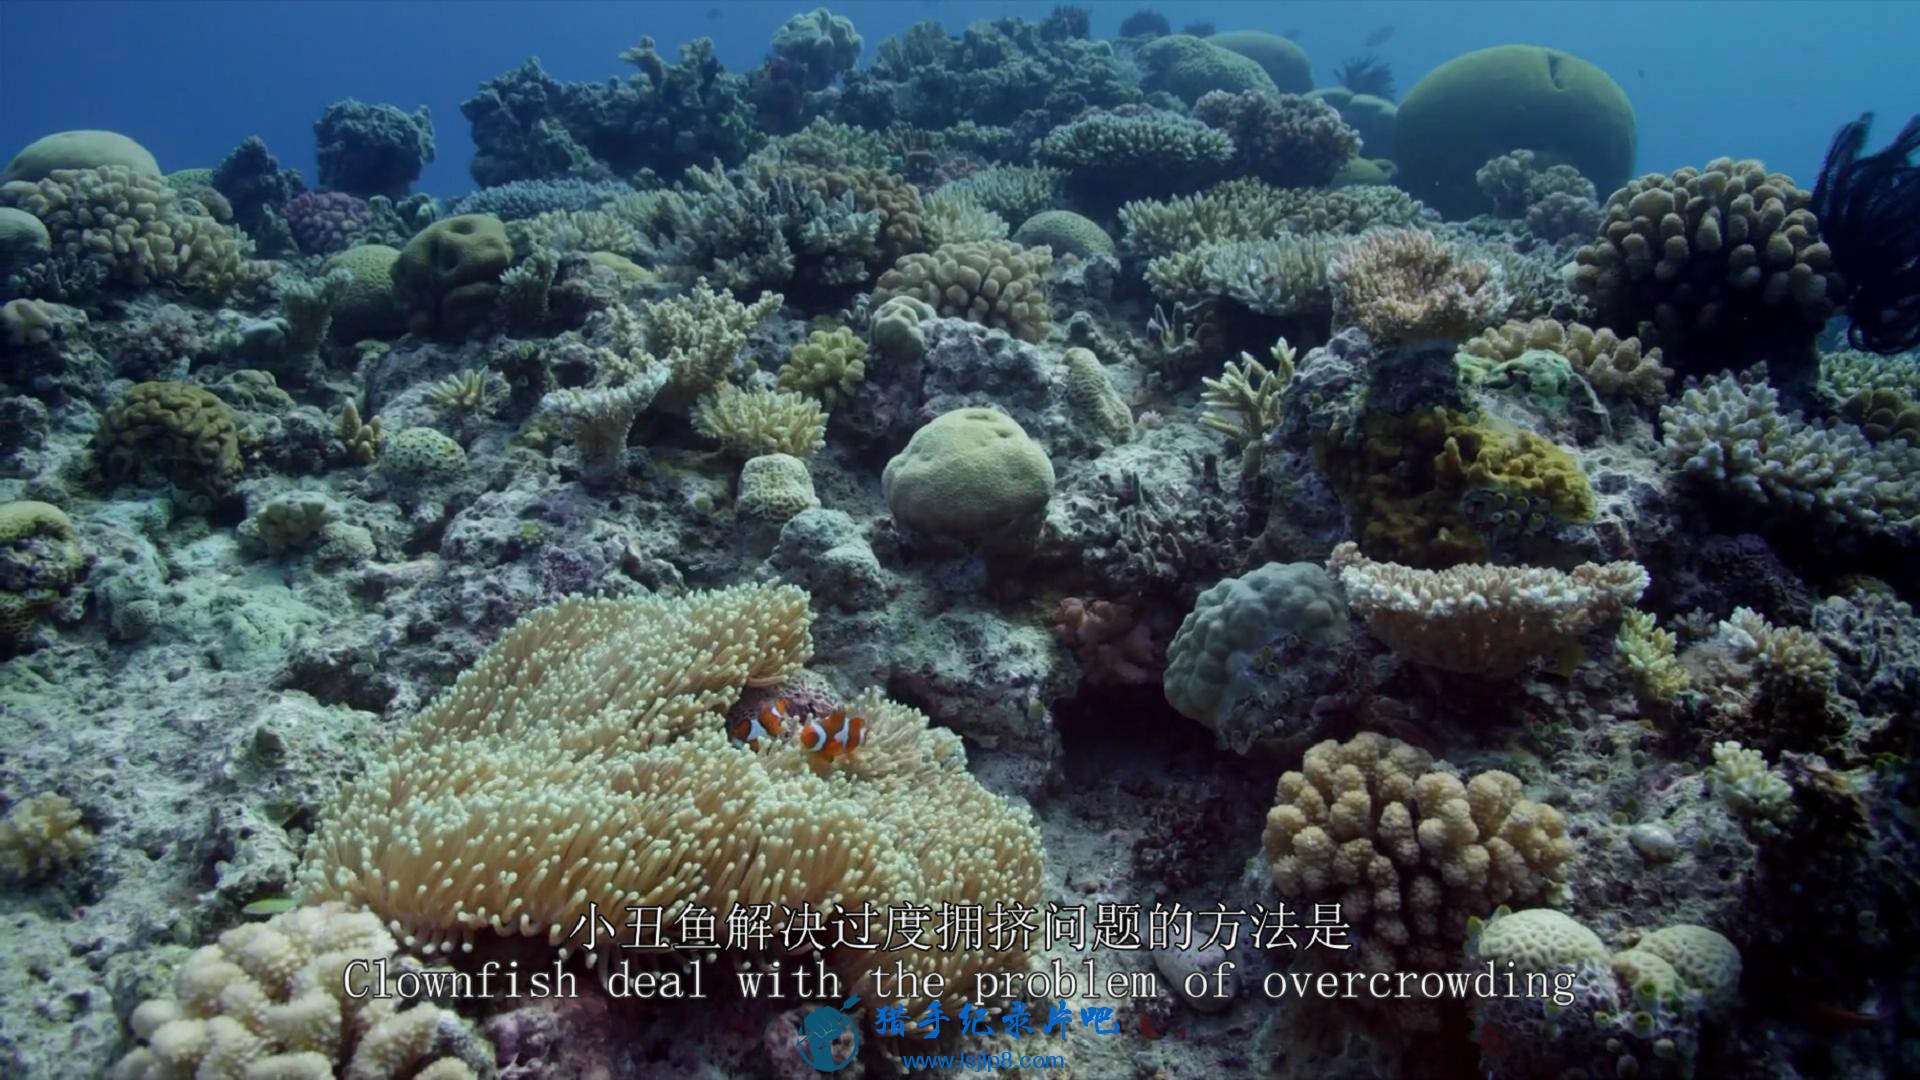 BBC.Great.Barrier.Reef.with.David.Attenborough.1of3.Builders.1080p.HDTV.x264.AAC.jpg